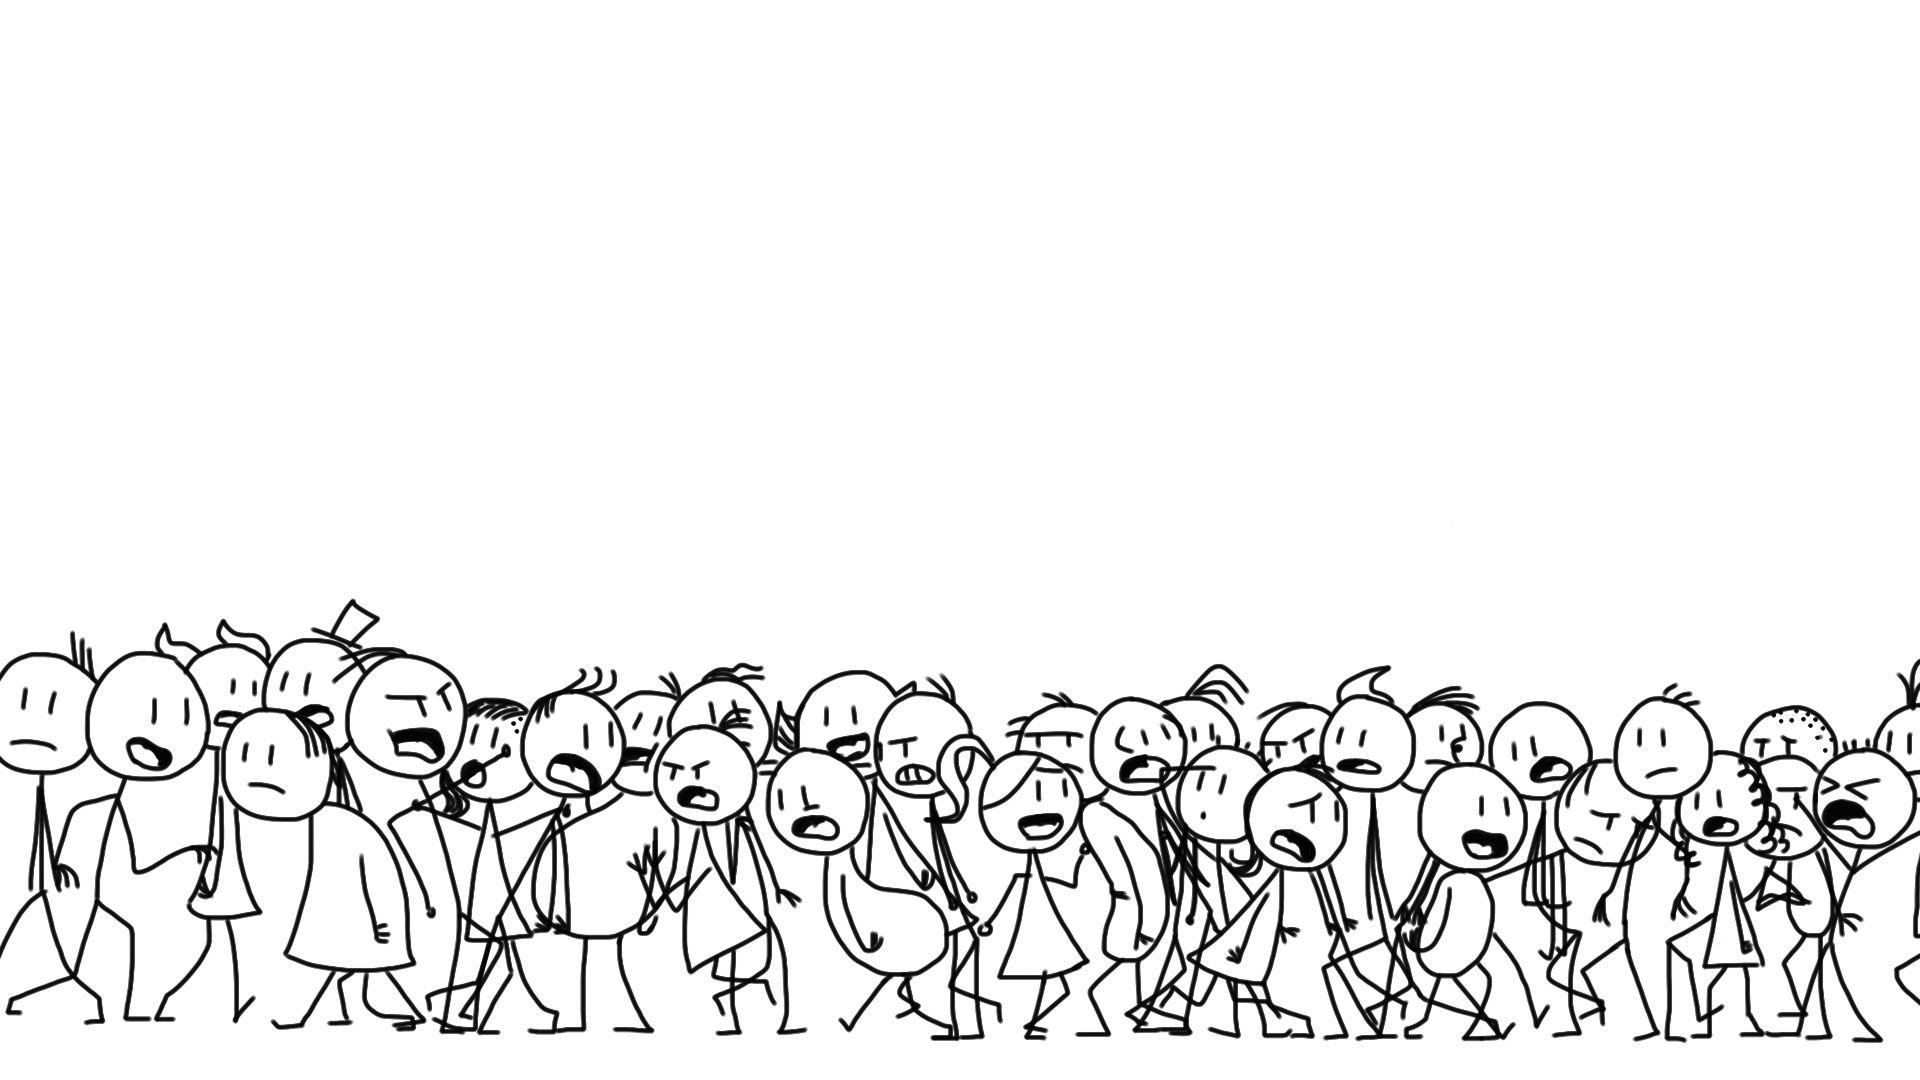 Stickman Crowd download the last version for iphone